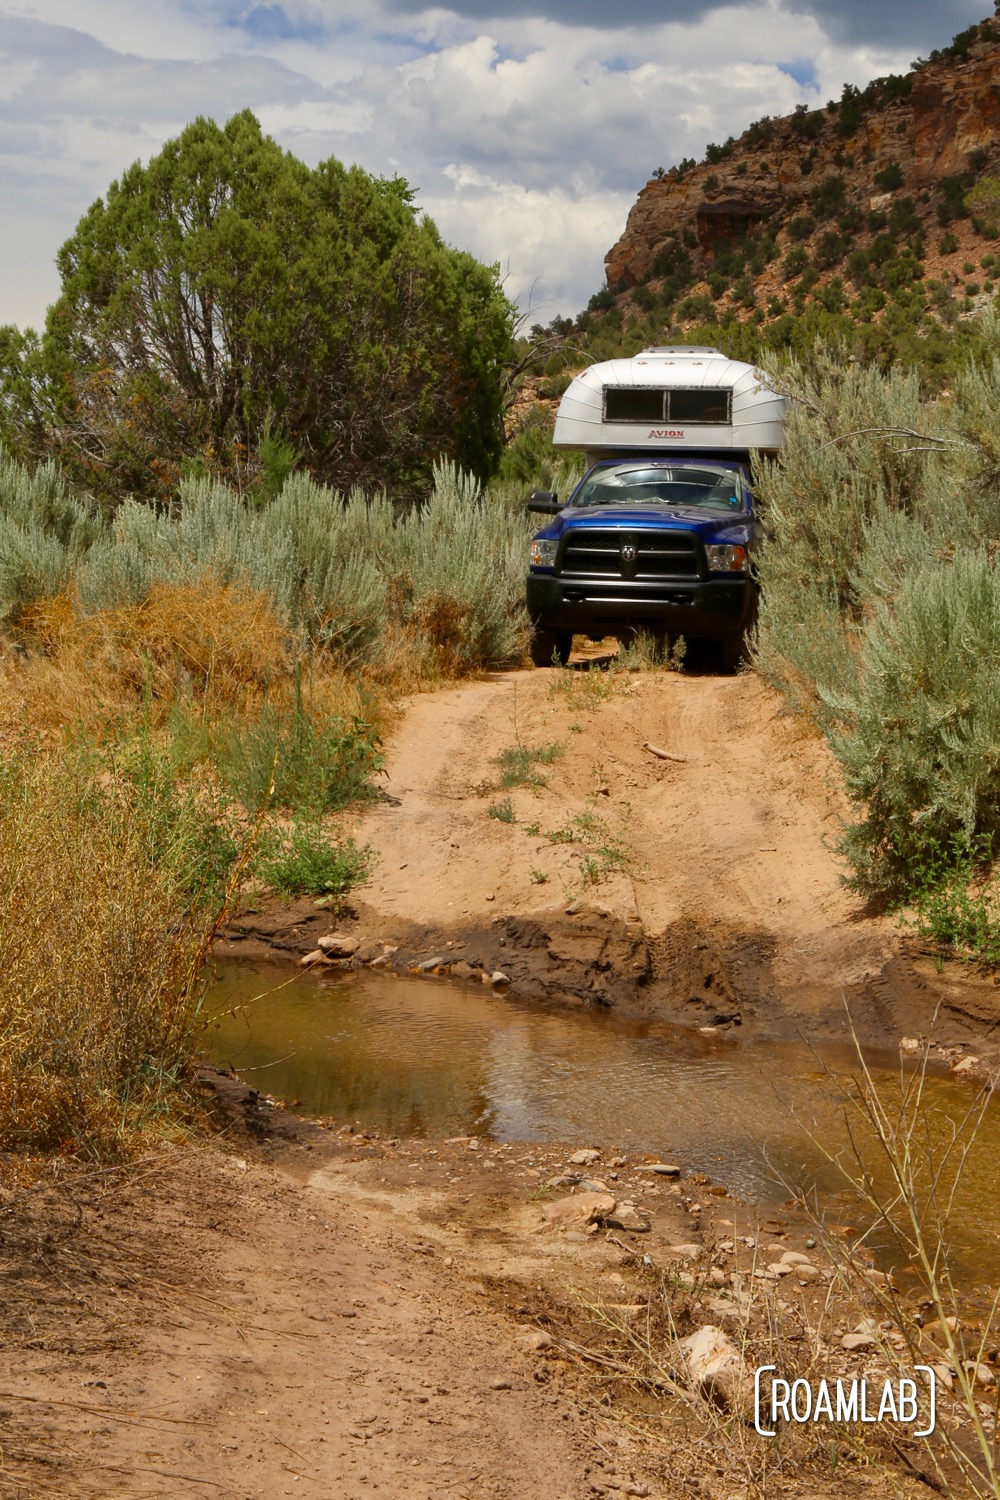 There are a few creak crossings along the trail. While the water is never that deep, the entries always have me concerned that we will bottom out and damage the rear end of the camper.